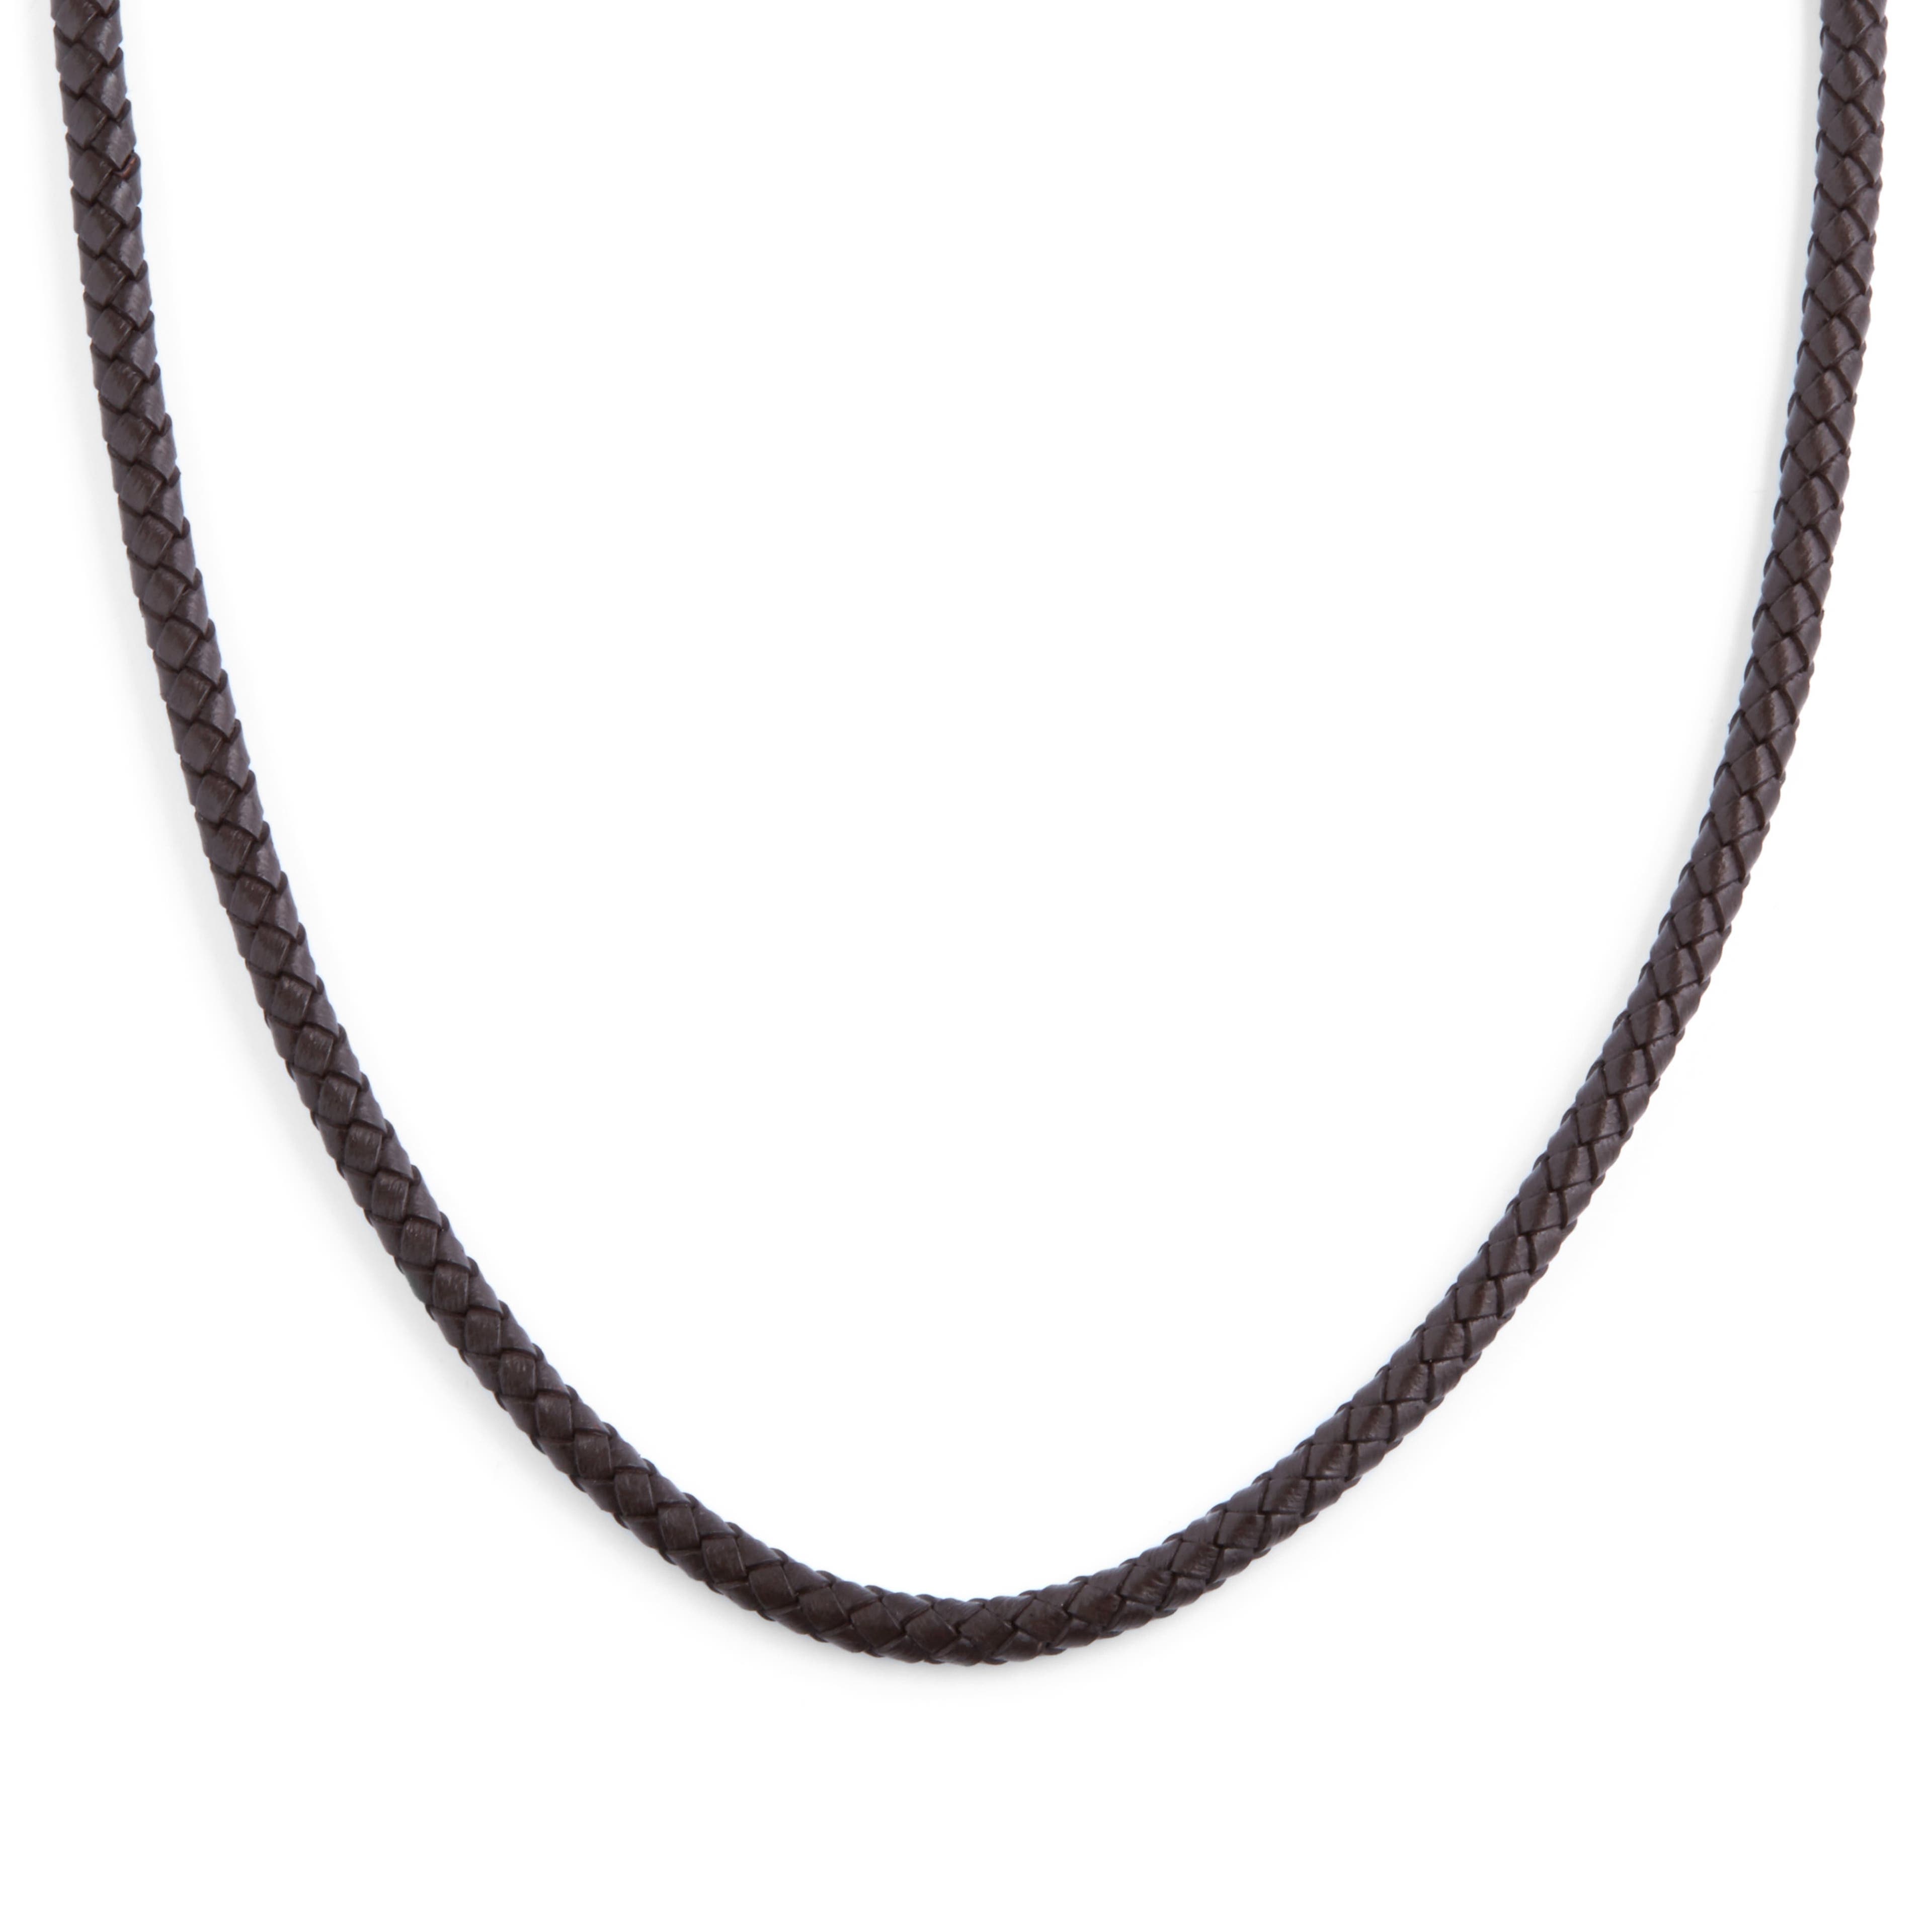 Tenvis | 1/5" (5 mm) Brown Leather Necklace